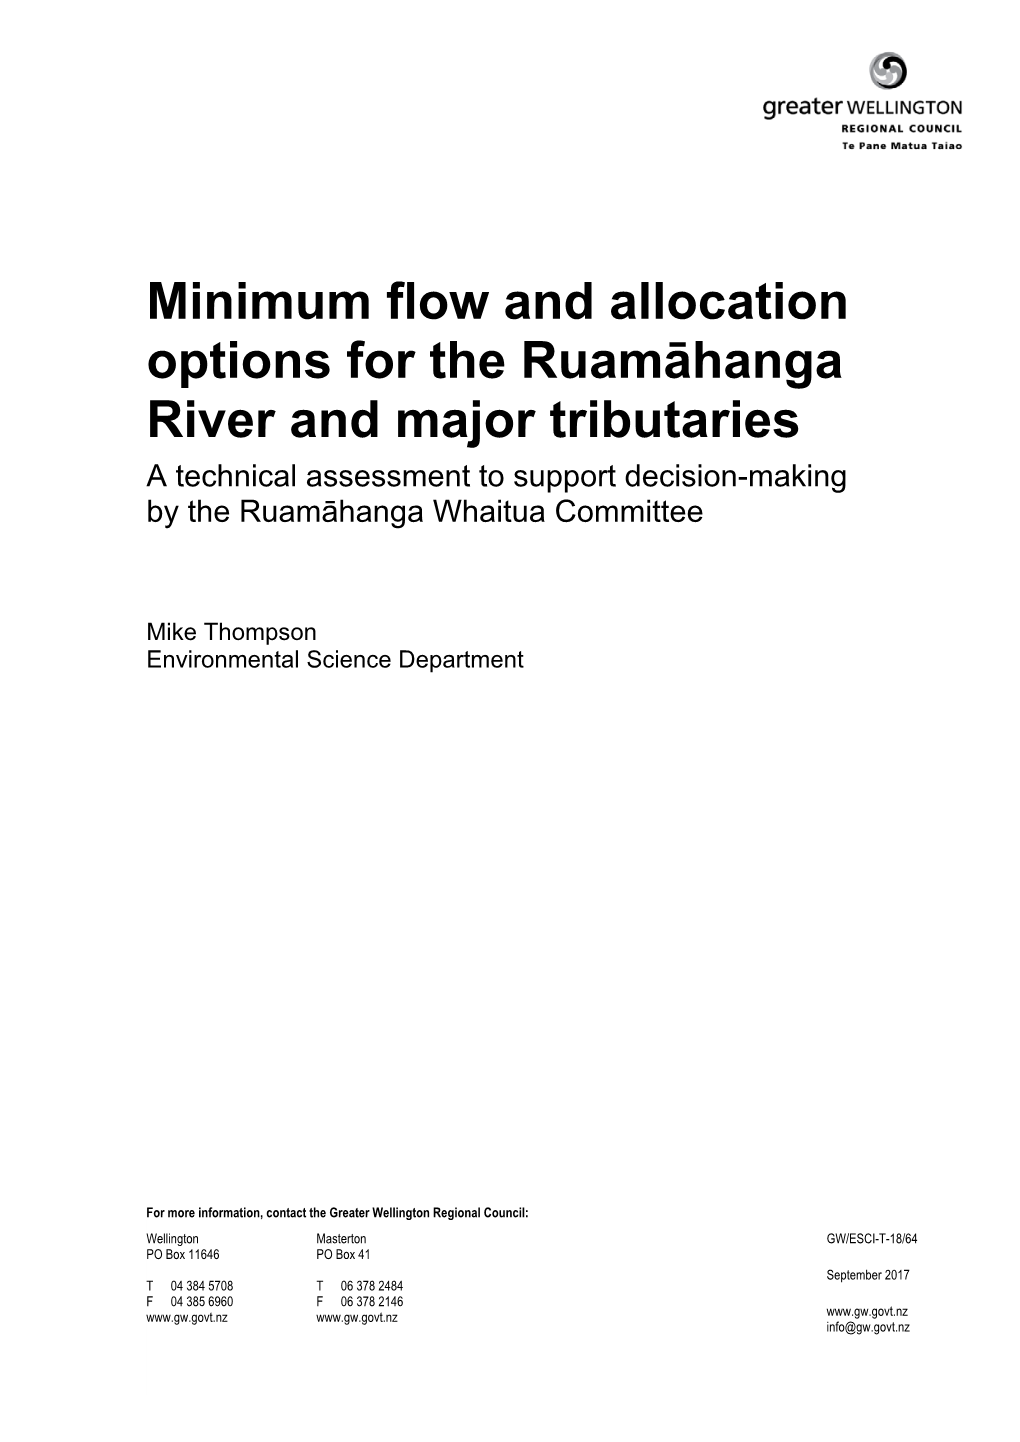 Minimum Flow and Allocation Options for the Ruamāhanga River and Major Tributaries